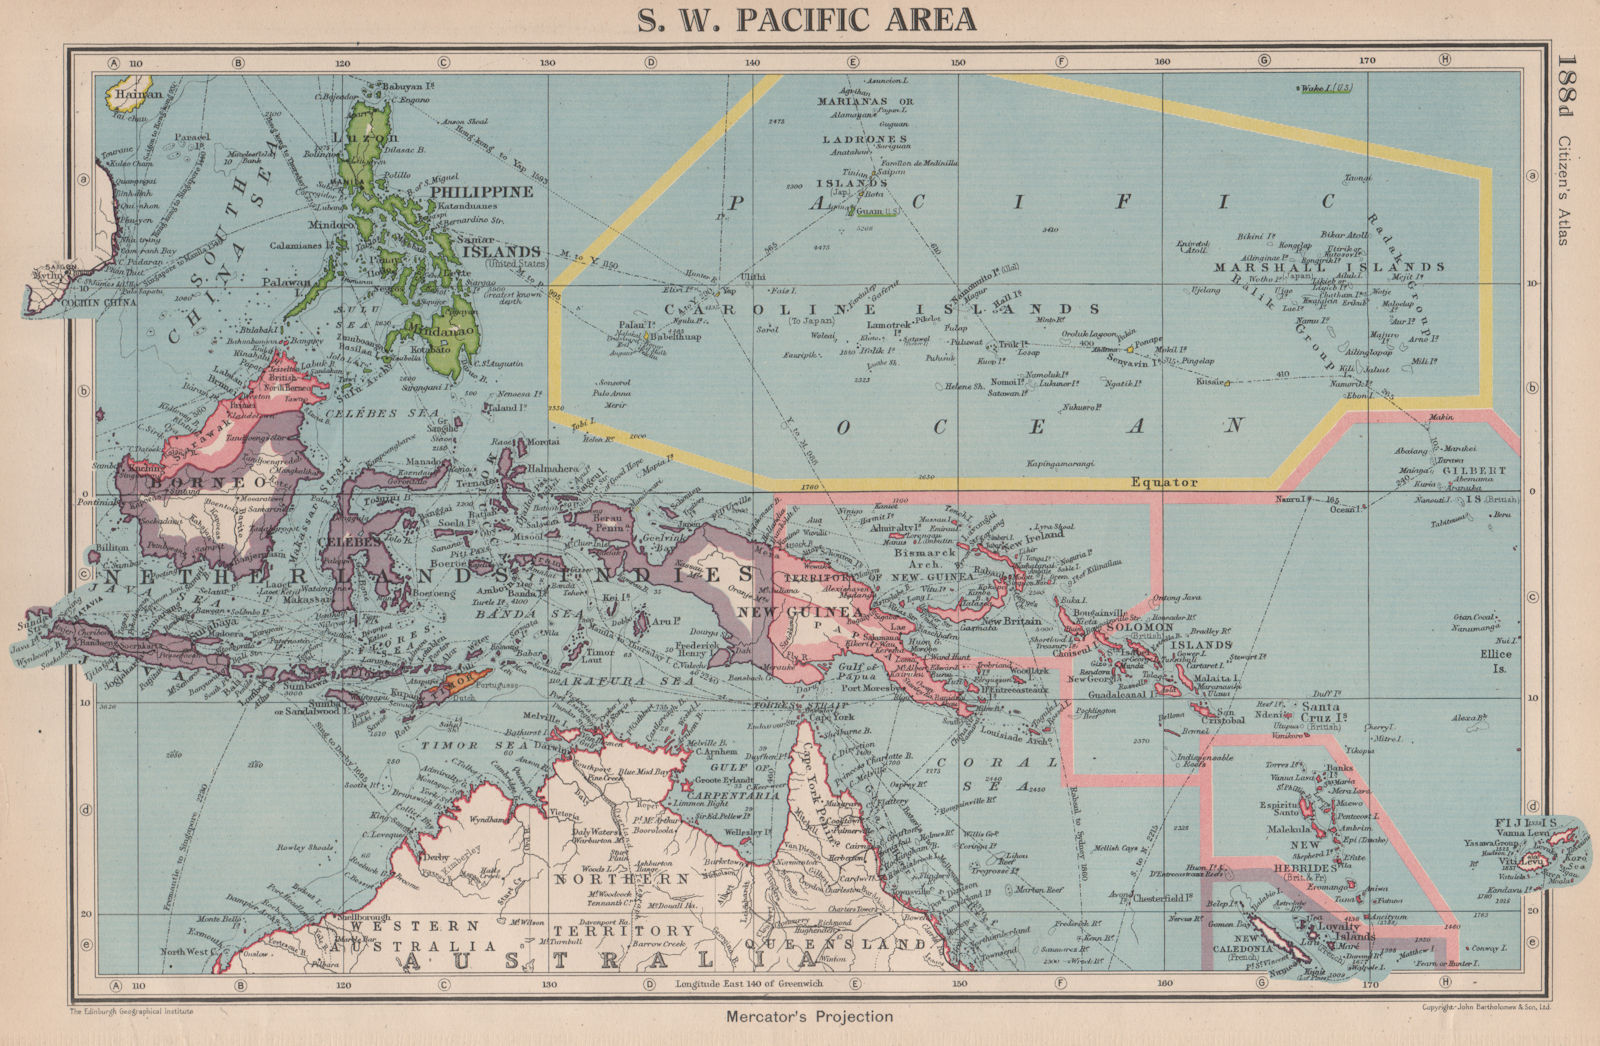 Associate Product SOUTH-WEST PACIFIC shows Japanese-occupied Micronesia. Caroline Islands 1944 map